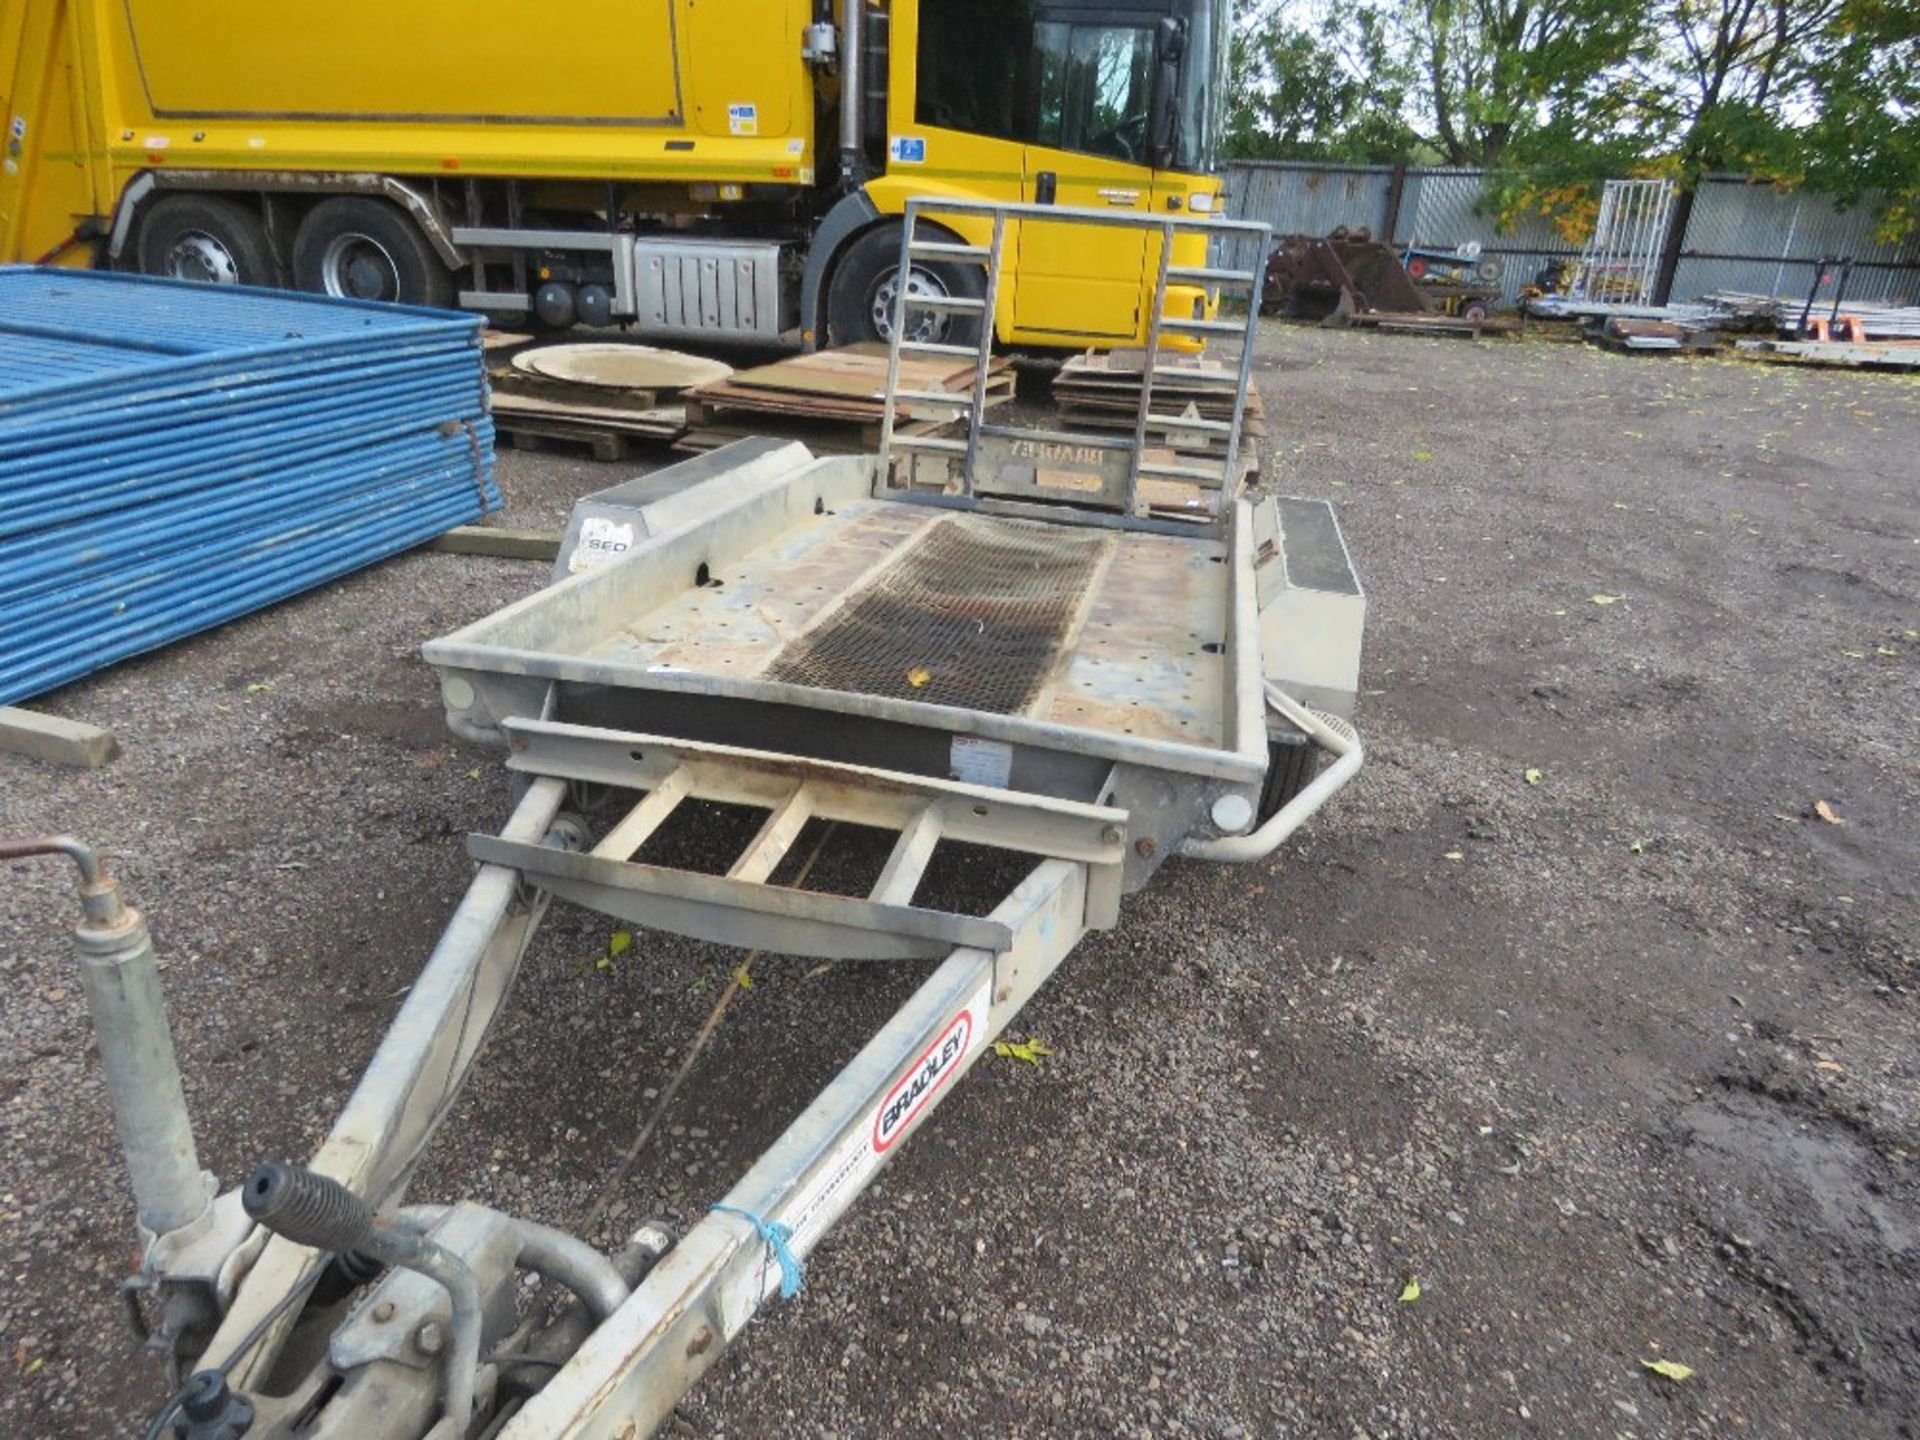 BRADLEY S2600PT TWIN AXLED MINI DIGGER PLANT TRAILER, YEAR 2008, PIVOT AXLE. 8FT X 4FT BED APPROX. - Image 4 of 8